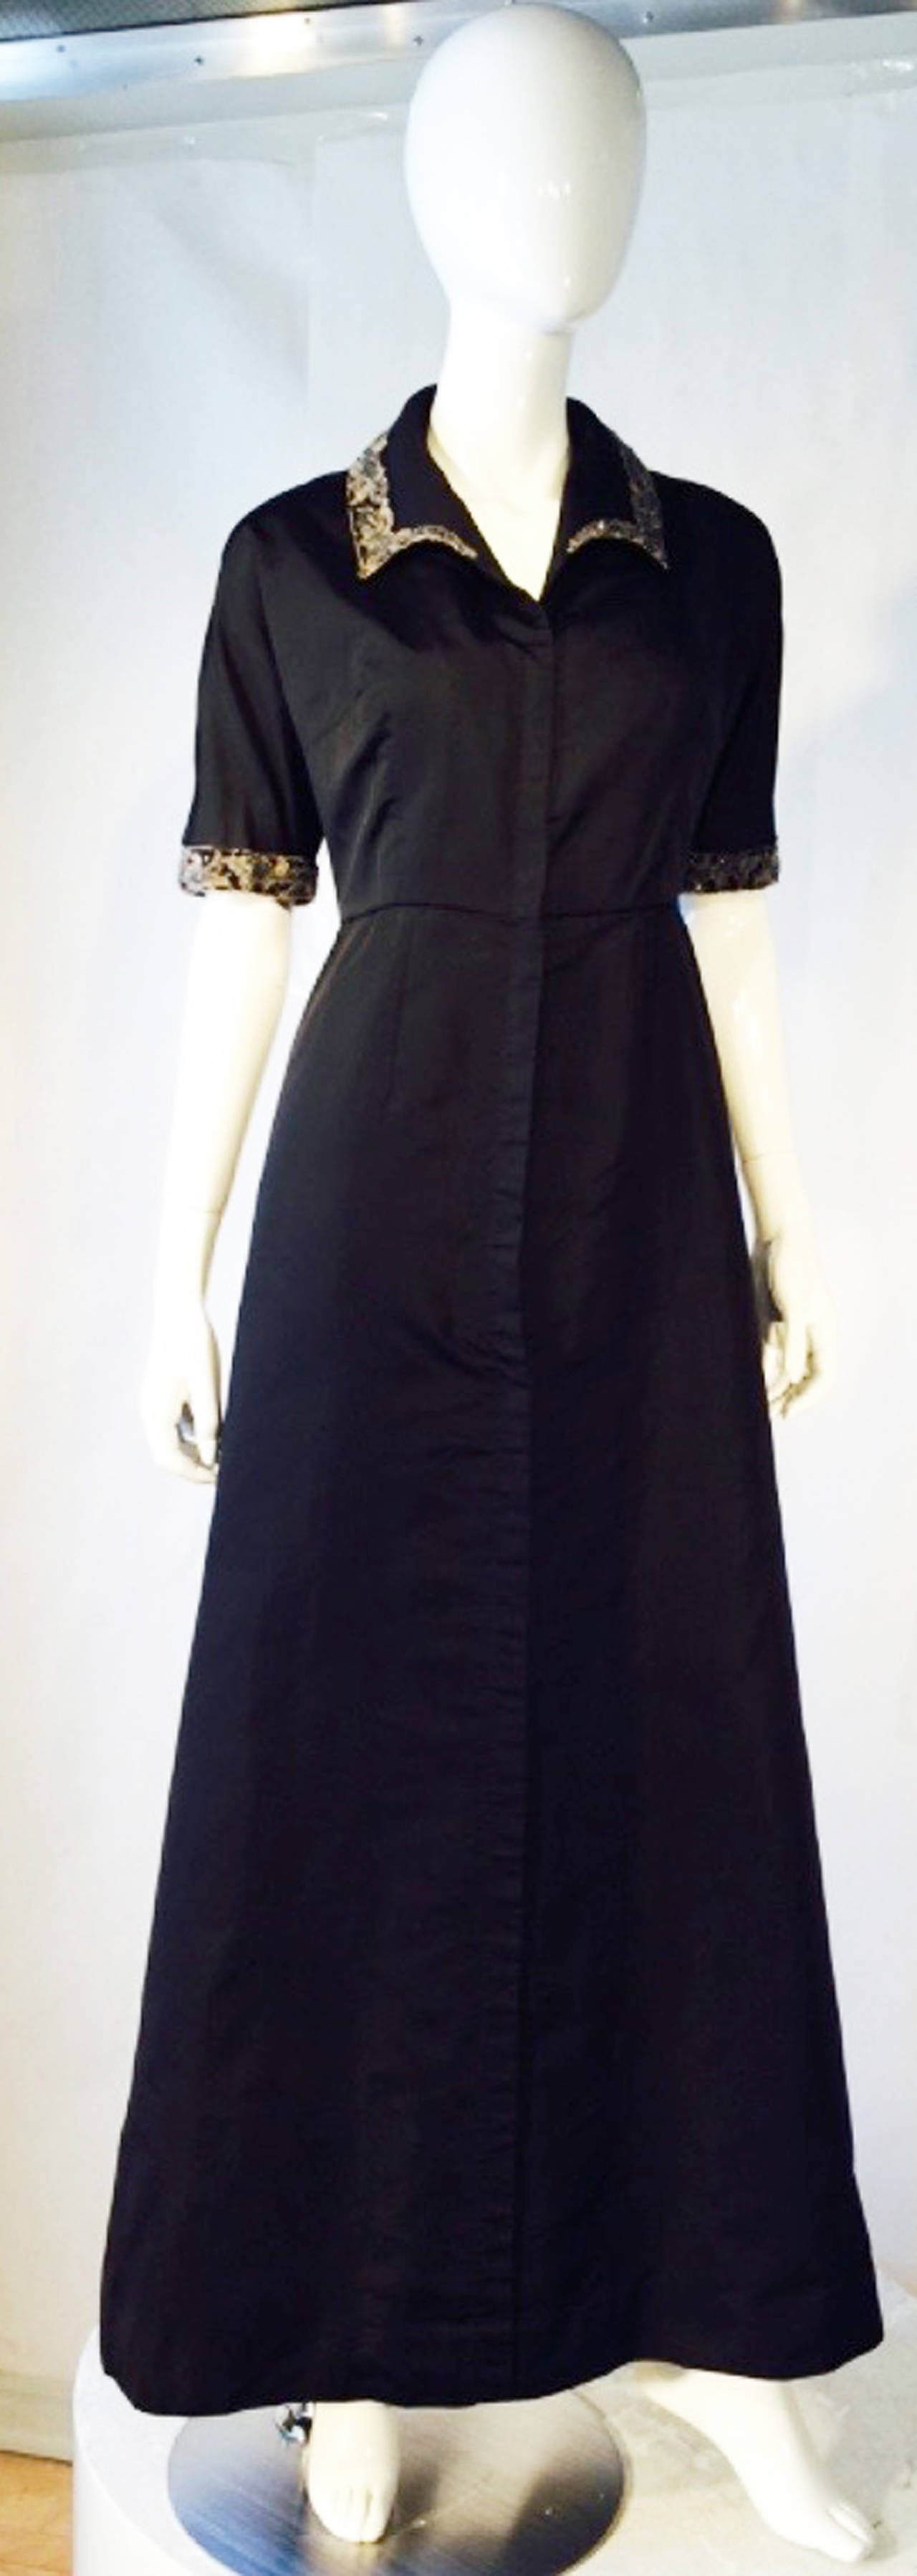 A exquisite and rare Elsa Schiaparelli London haute couture evening gown. A very unusual and elaborately hand constructed item features many of the hallmarks of Elsa Schiaparelli regarding fabric, construction and the use of the metal Liberty zipper